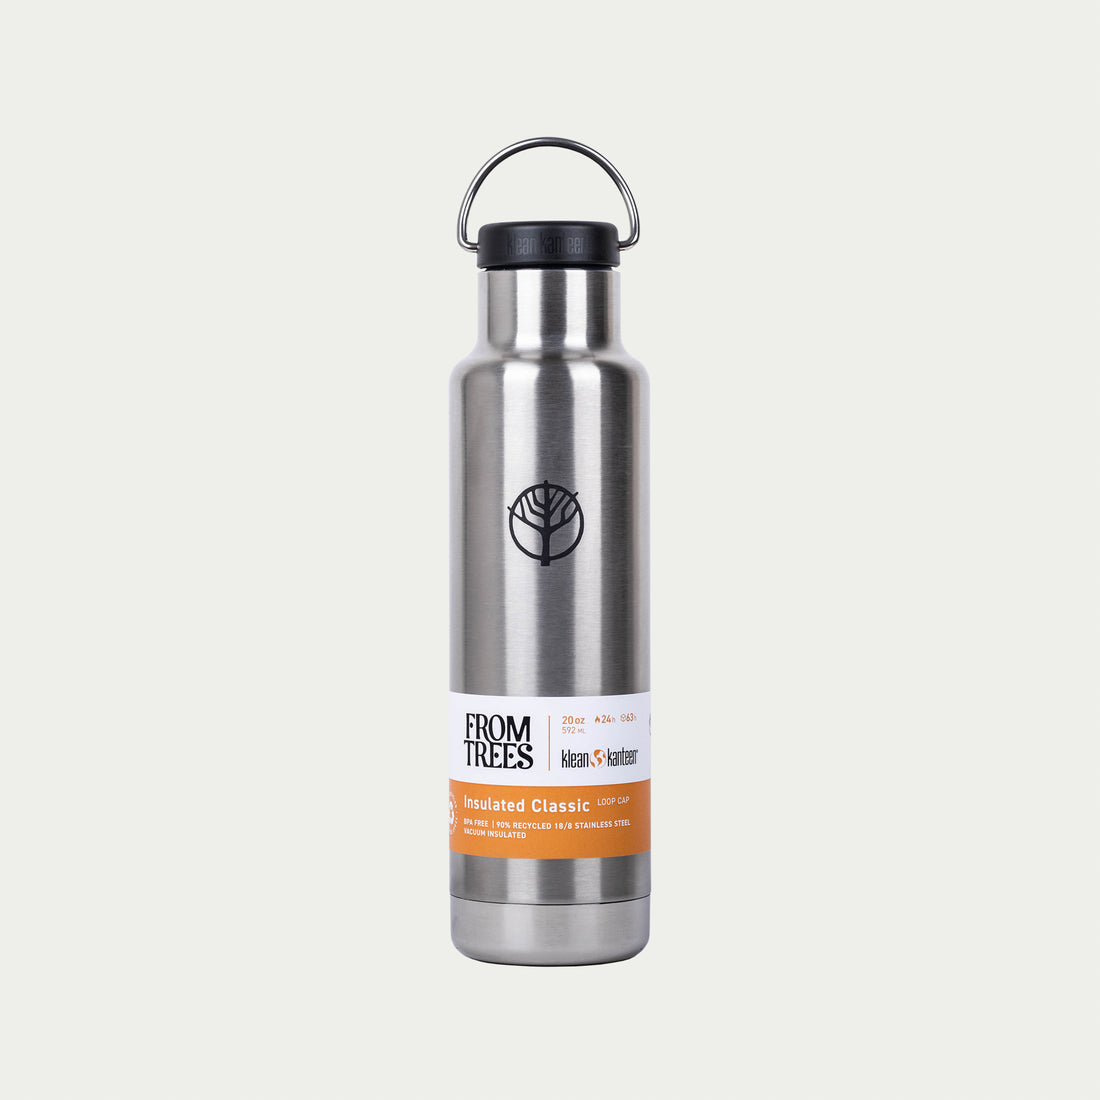 From Trees + Klean Kanteen . Insulated Classic 592ml (20oz)